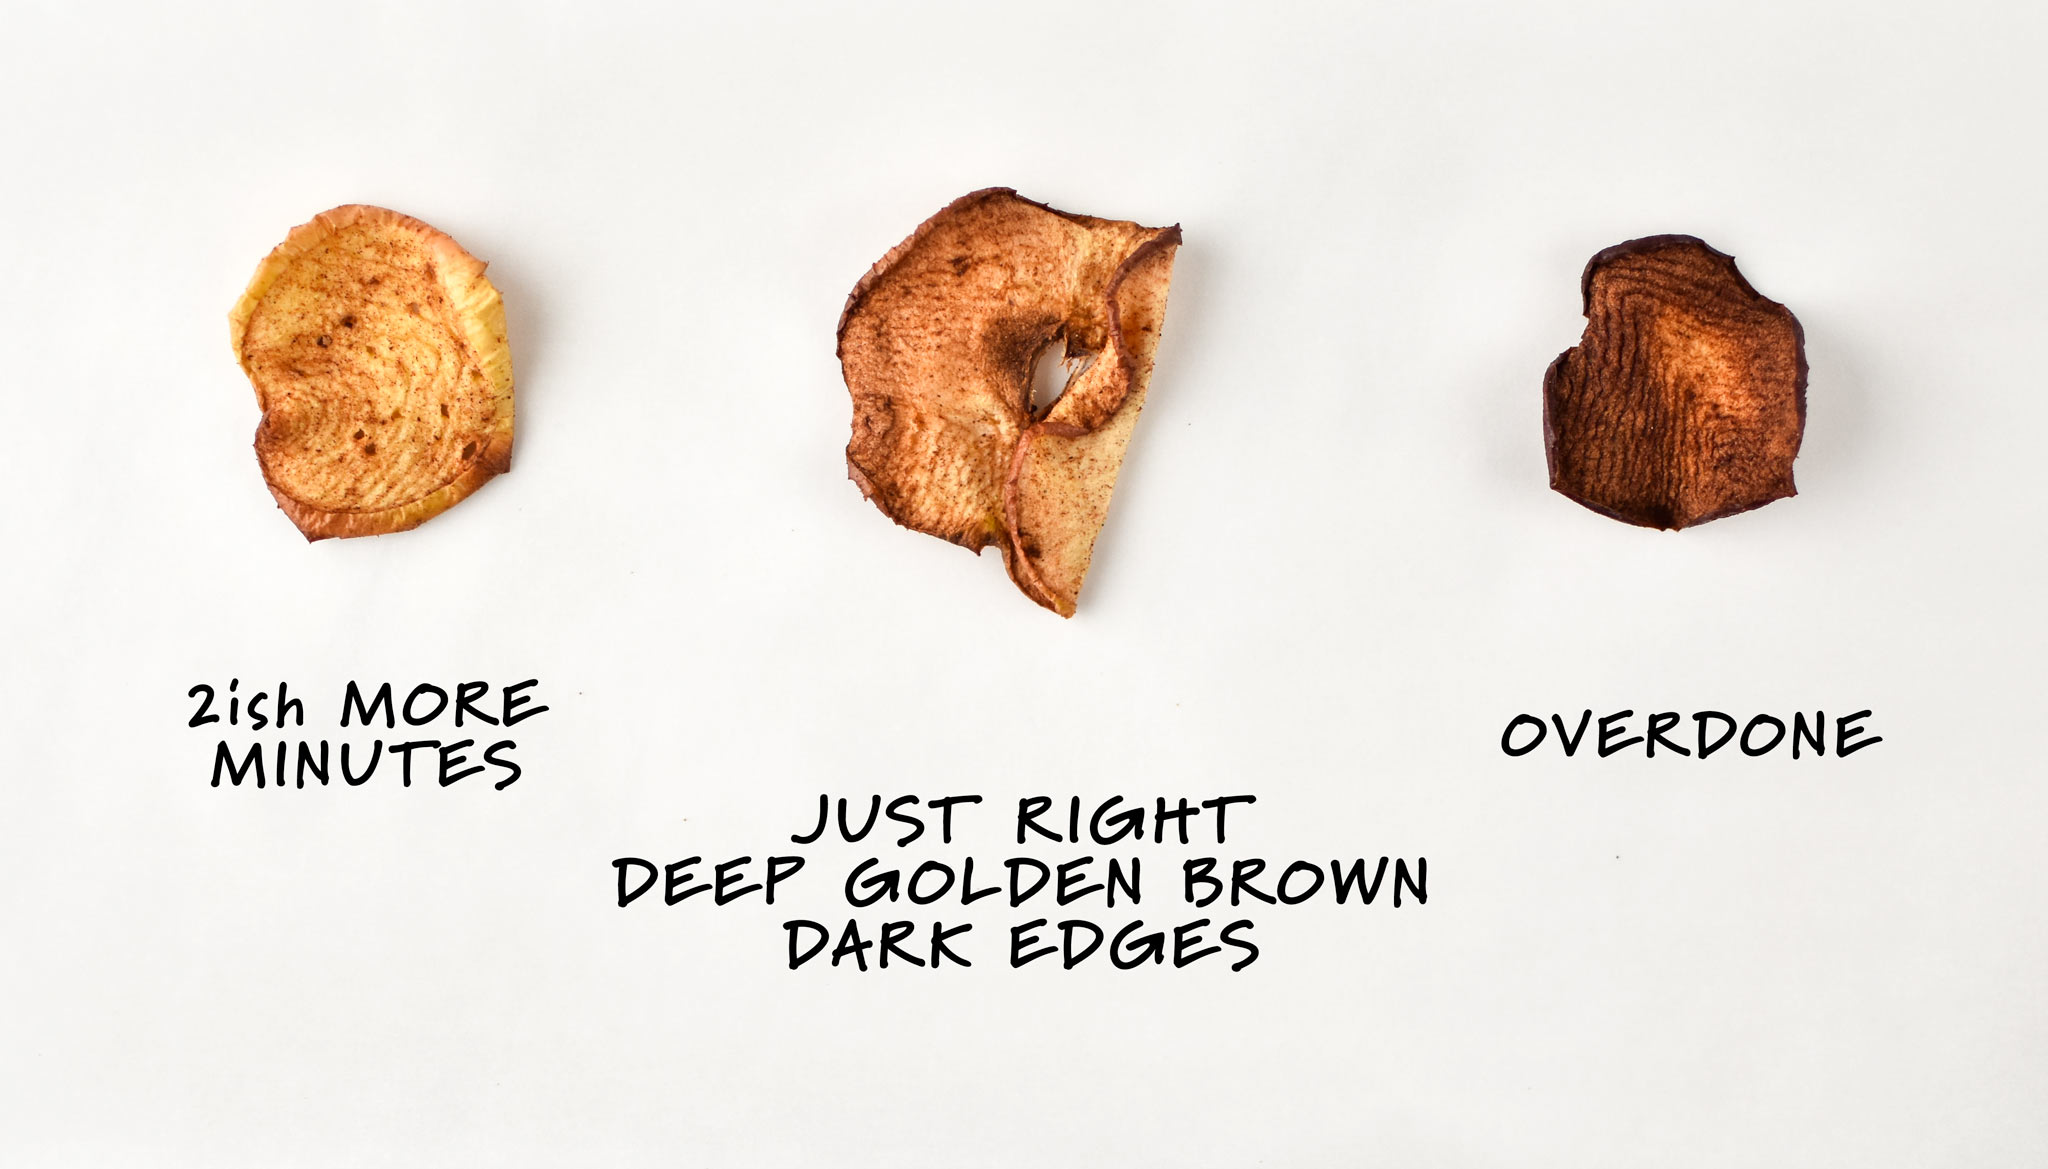 A diagram for how to make apple chips in an air fryer. Left needs 2ish more minutes, middle is just right with deep golden brown edges, and right is overdone.